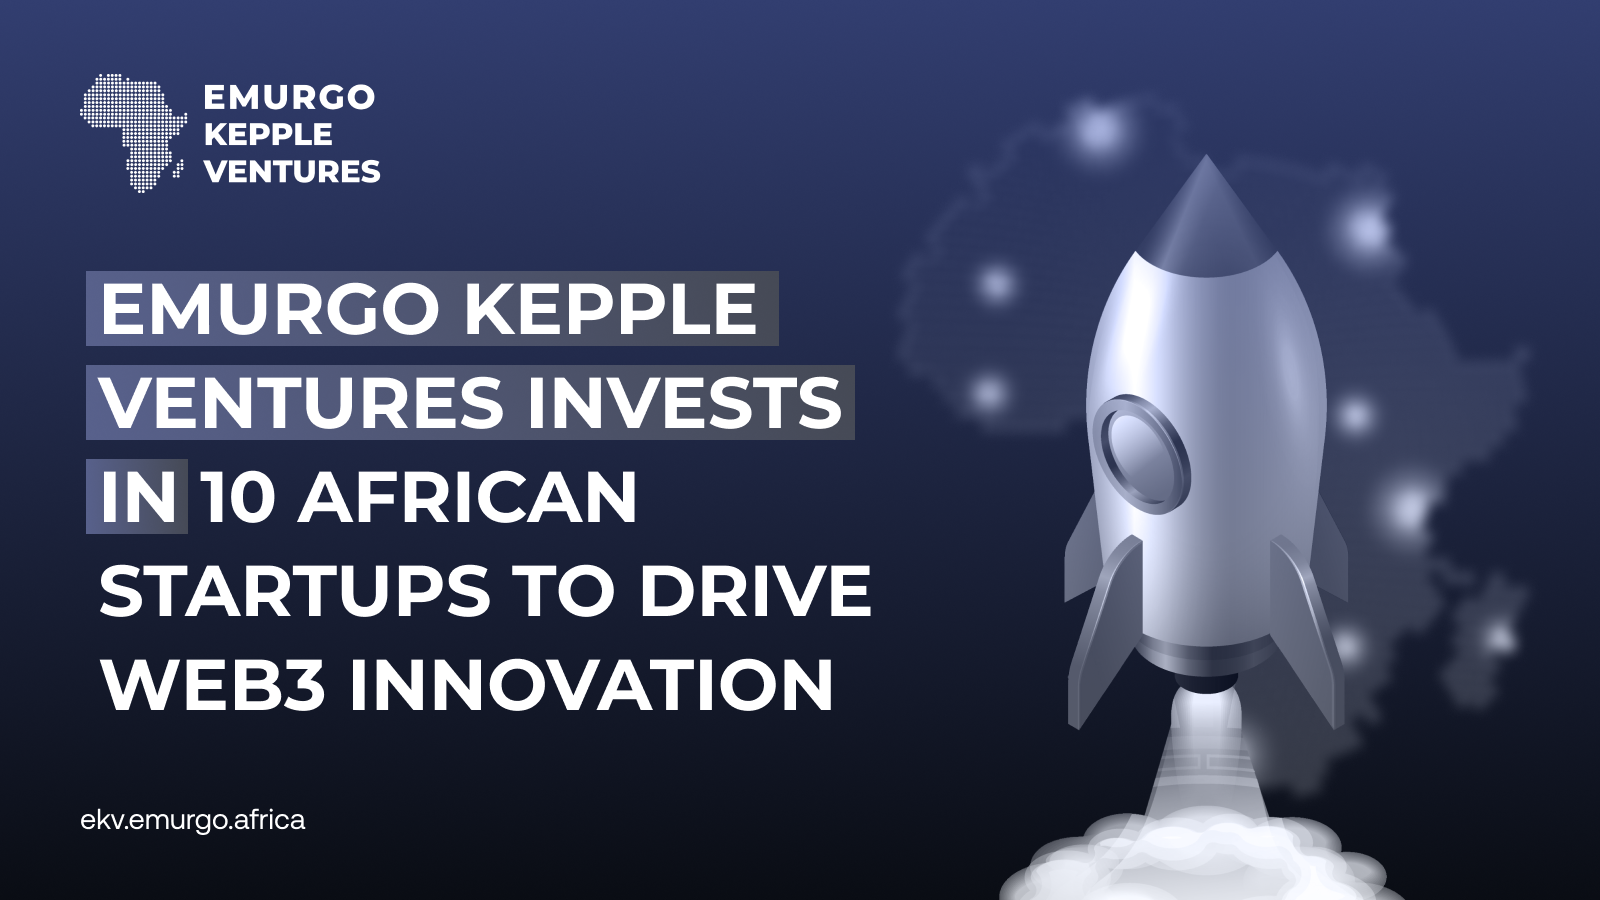 EMURGO KEPPLE VENTURES INVESTS IN 10 AFRICAN STARTUPS TO DRIVE WEB3 INNOVATION